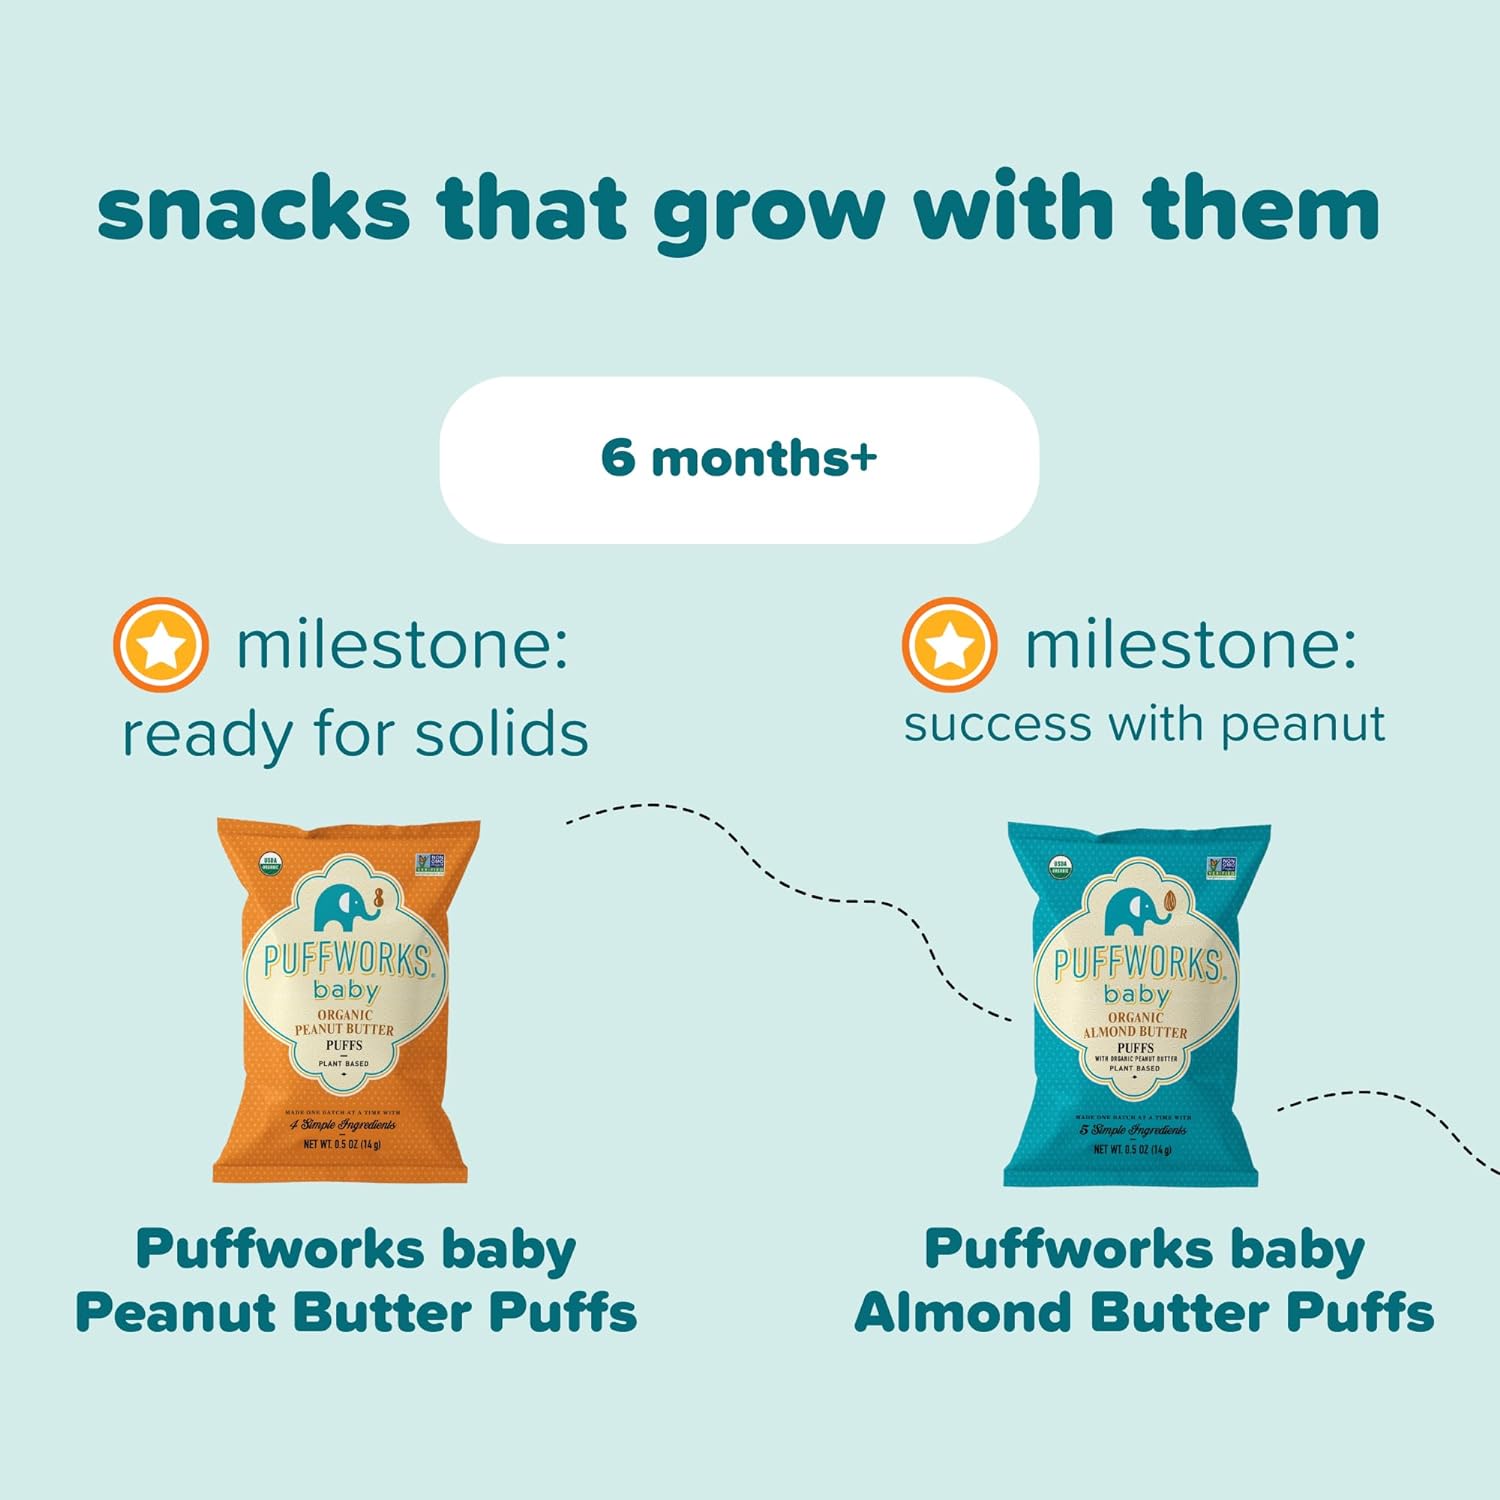 Puffworks Baby Peanut and Almond Variety Pack, Perfect for Early Peanut Introduction, Plant Protein, USDA Organic, Gluten-Free, Vegan, Non-GMO, Kosher, 0.5 Ounce (Pack of 12) : Baby